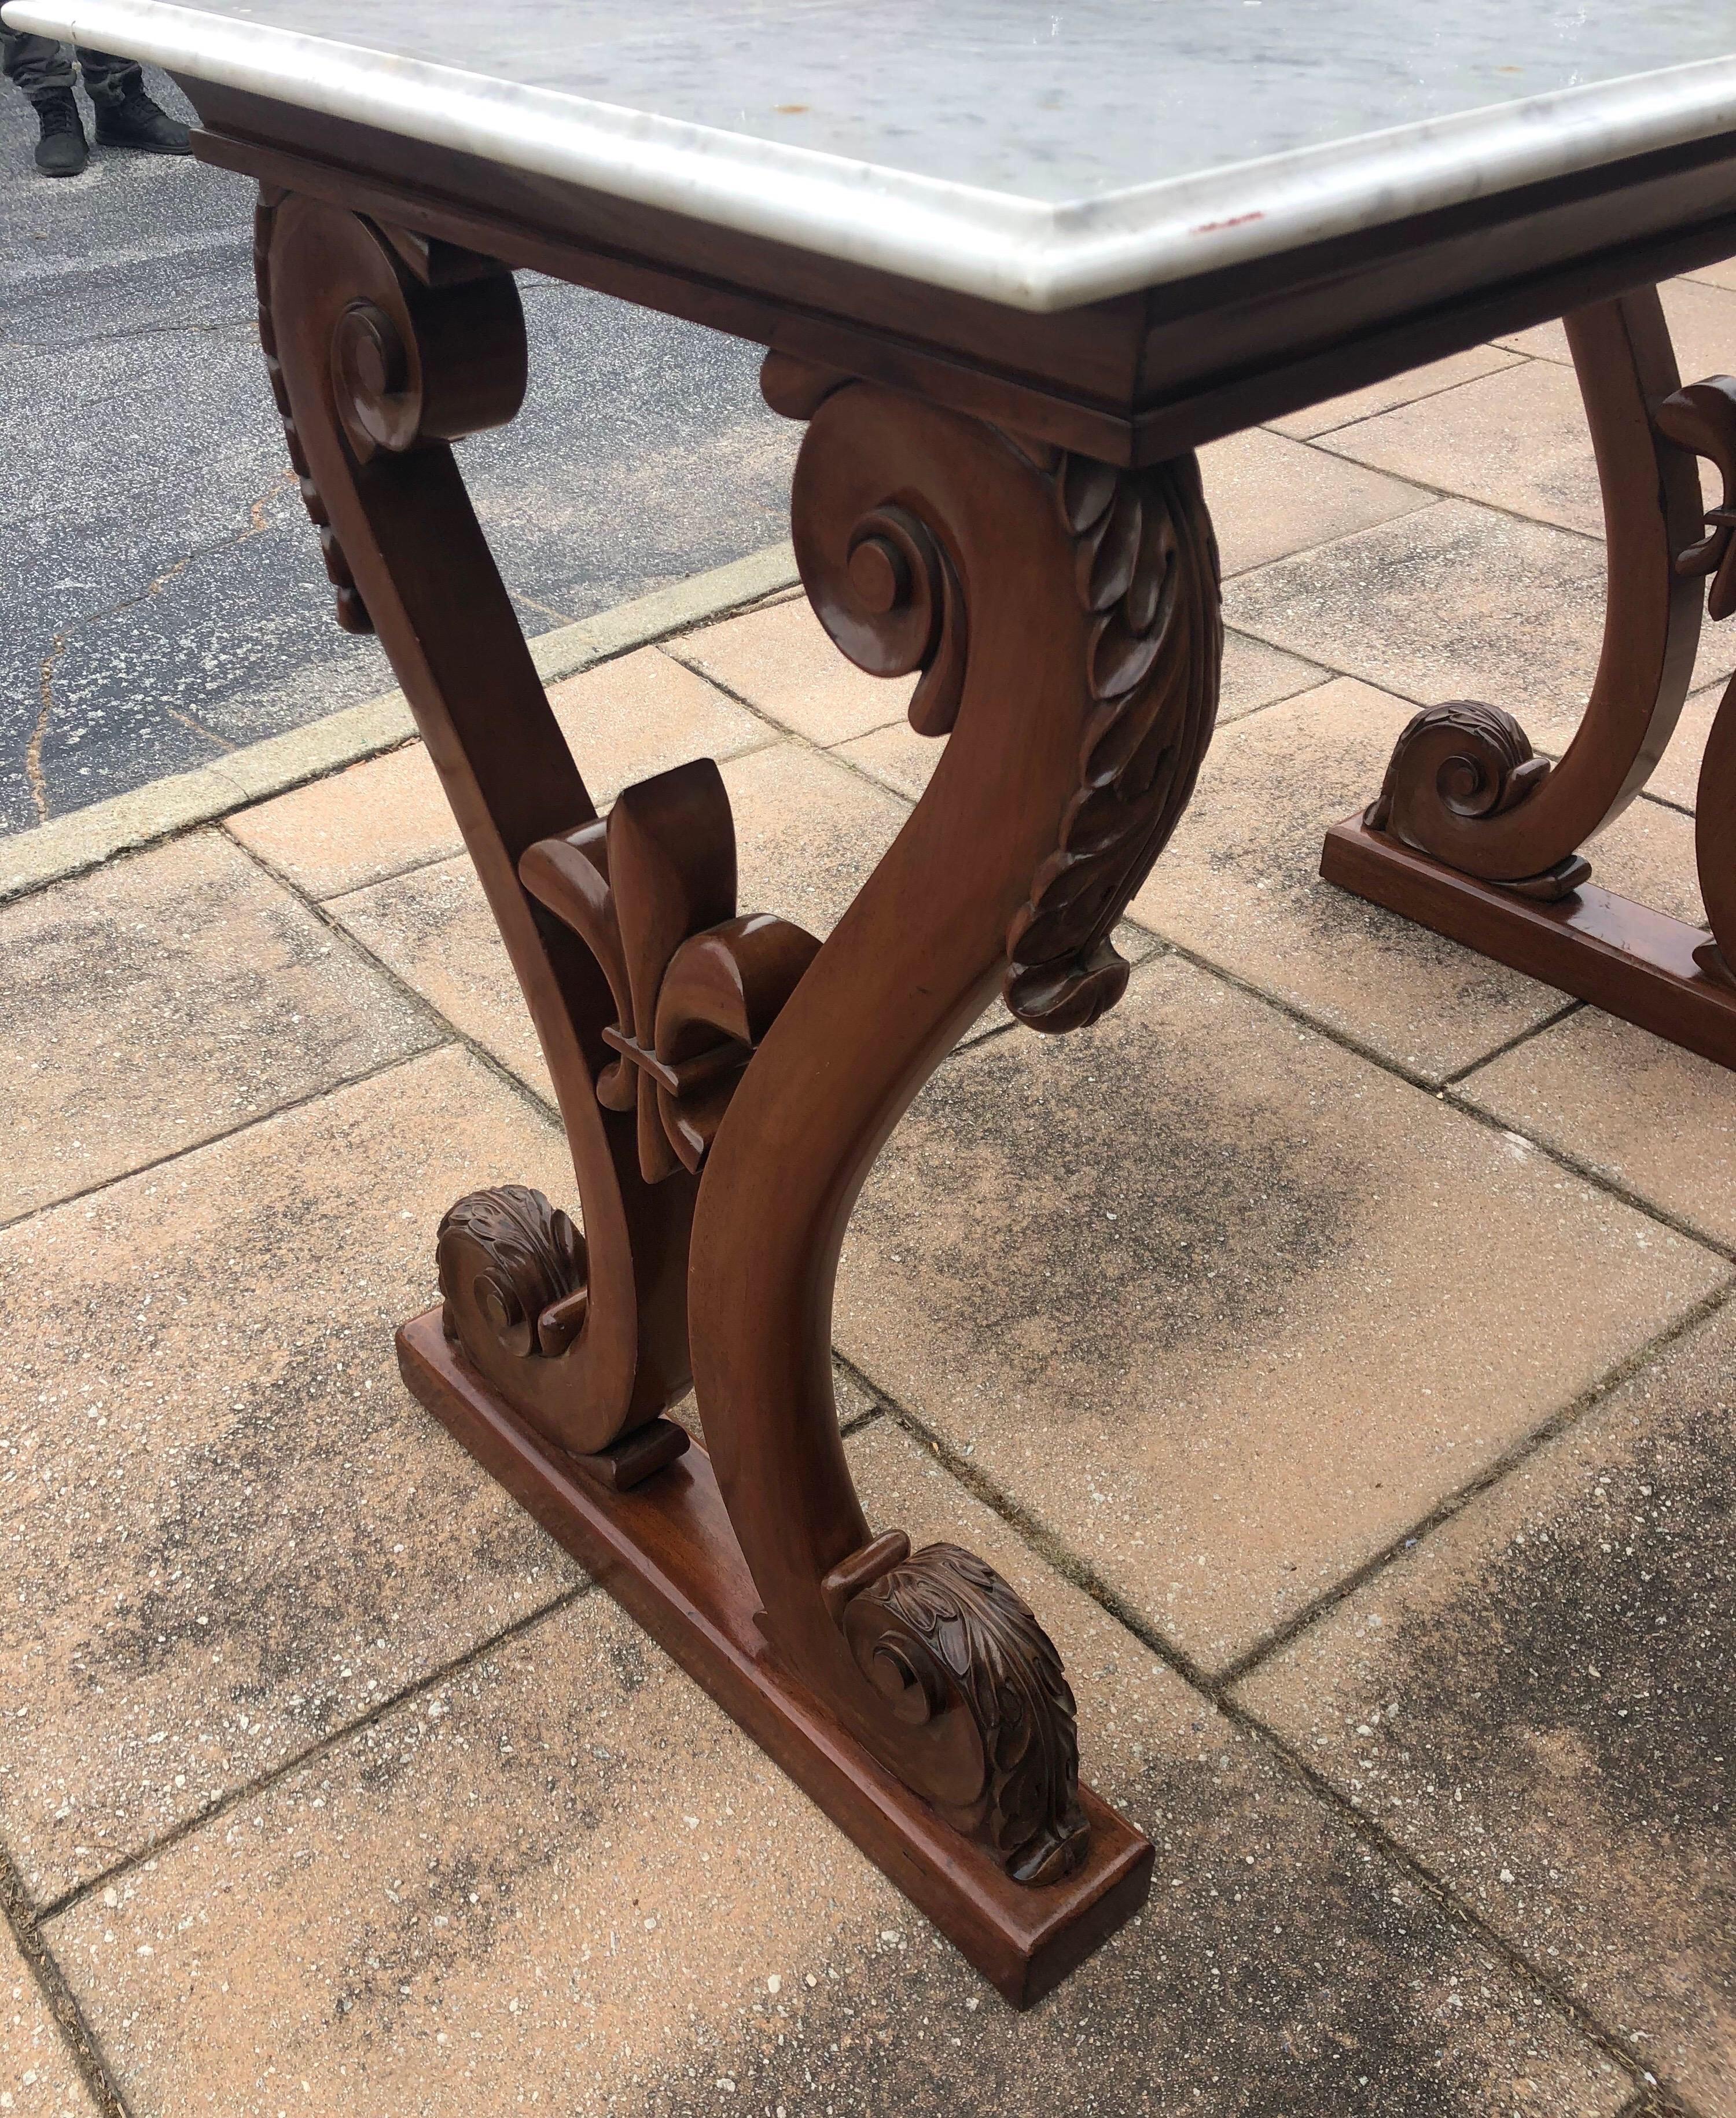 19th century Irish William IV Marble-Top Mahogany Hall Table with Fleur de Lys For Sale 6